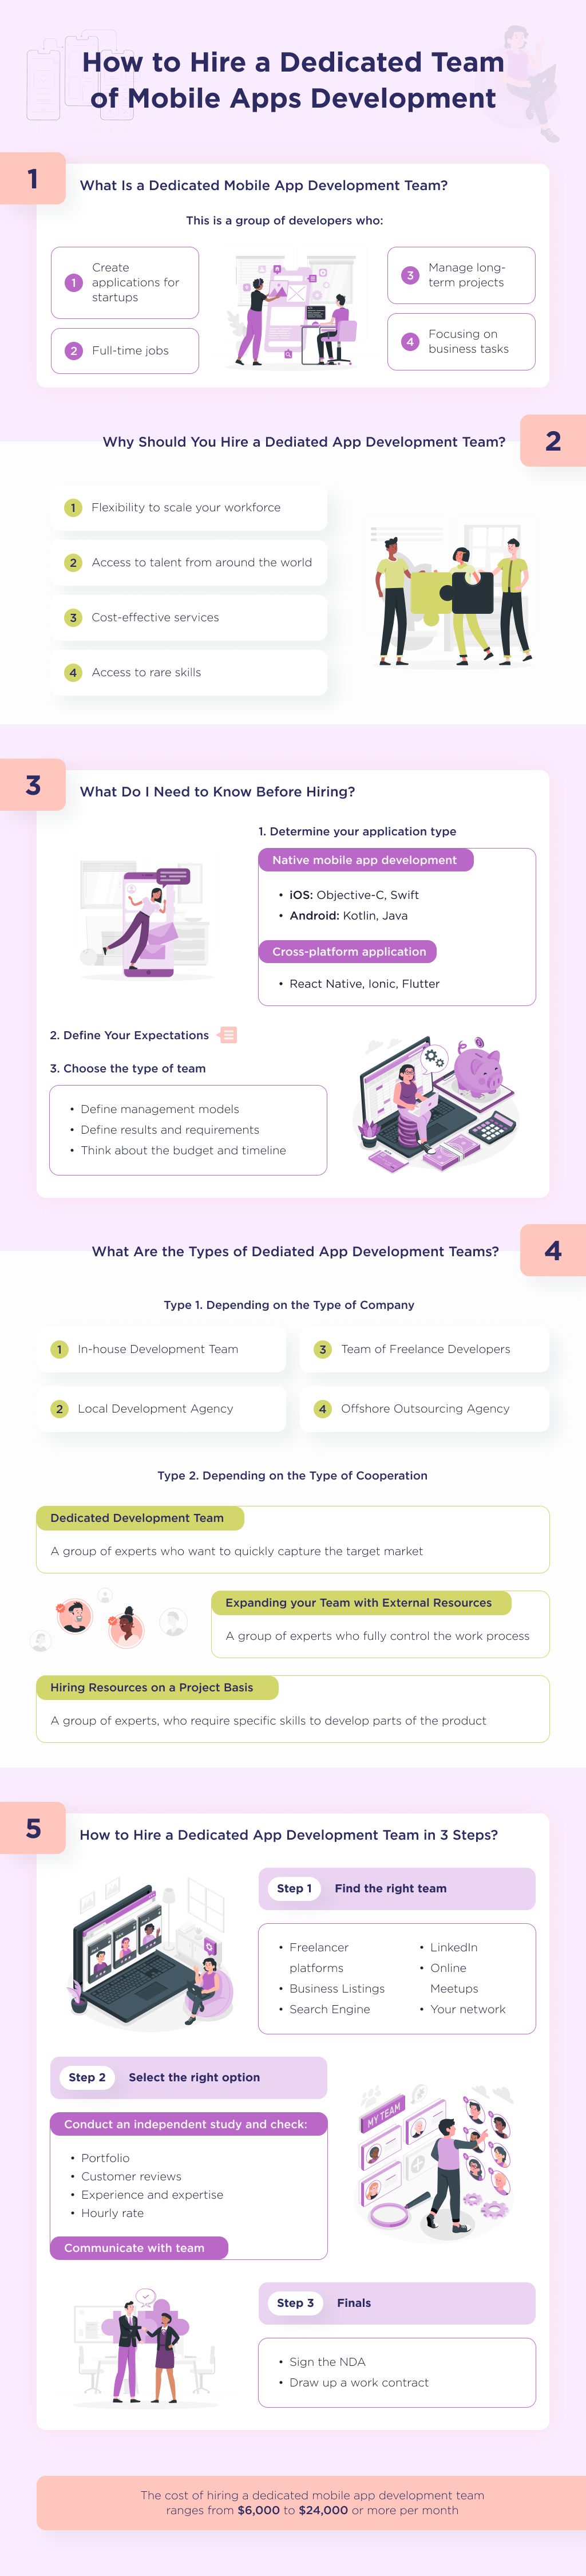 This infographic shows the highlights that will help you hire a dedicated mobile app development team